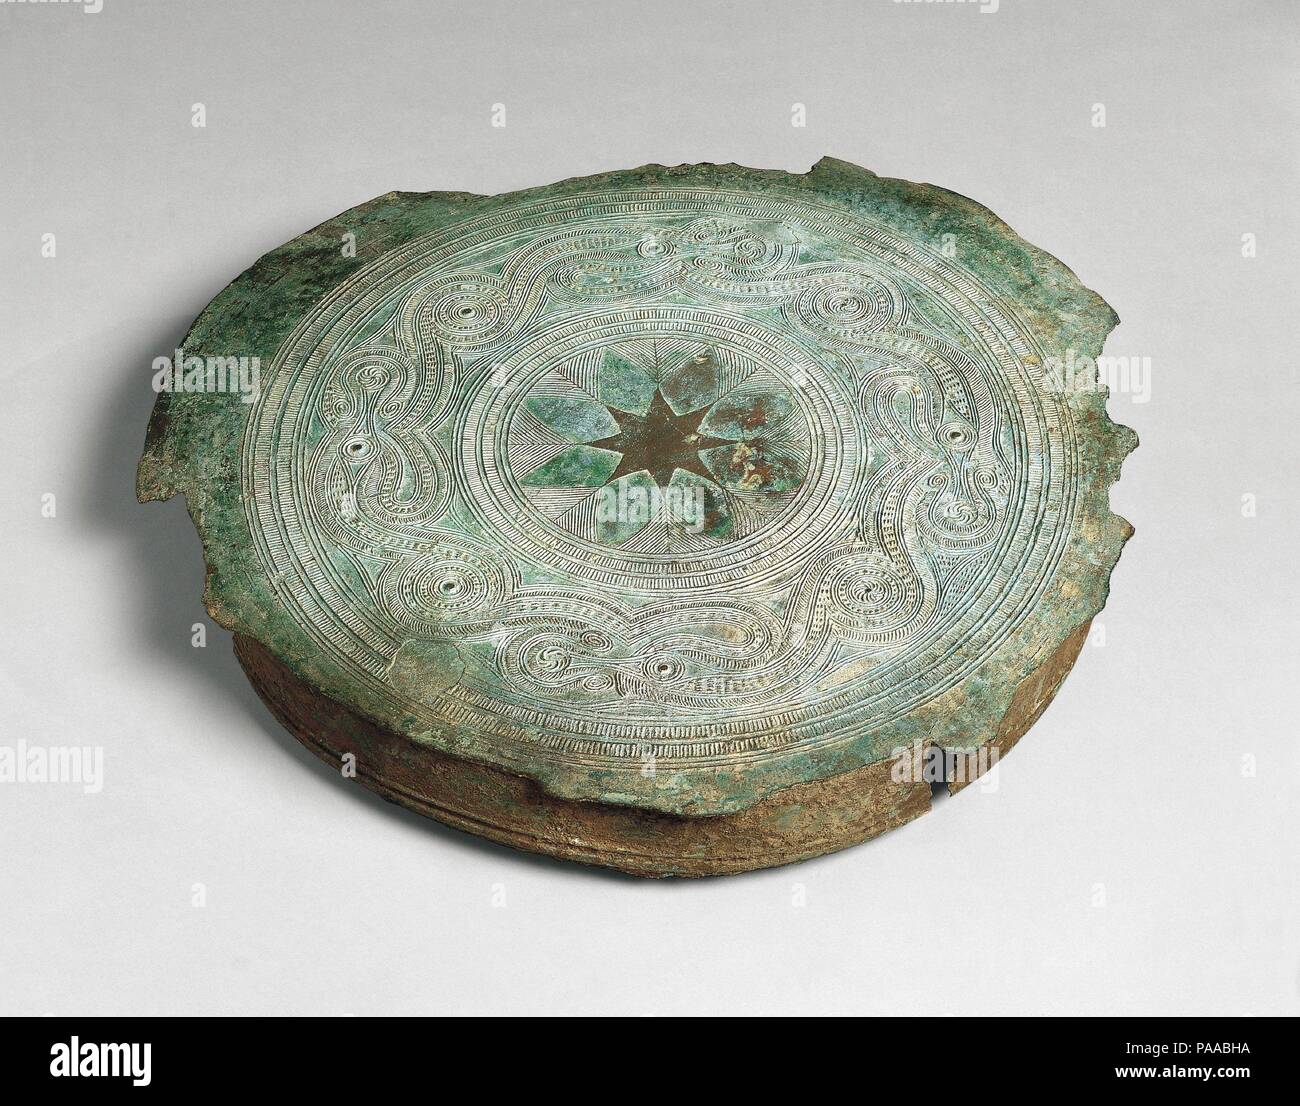 Tympanum of a Pejeng-Type Drum. Culture: Indonesia (Sumba). Dimensions: Diam. 27 15/16  in. (71 cm). Date: ca. 500 B.C.-A.D. 300.  A distinctive style of drum was made in Indonesia that was hourglass-shaped with separately cast and soldered tympanum that overhang the body. In this fragmentary example, the central star design of the top seems to be bordered by stylized feathers and the large outer band of decoration, comprised of a series of interlocking meanders, probably represents birds. Museum: Metropolitan Museum of Art, New York, USA. Stock Photo